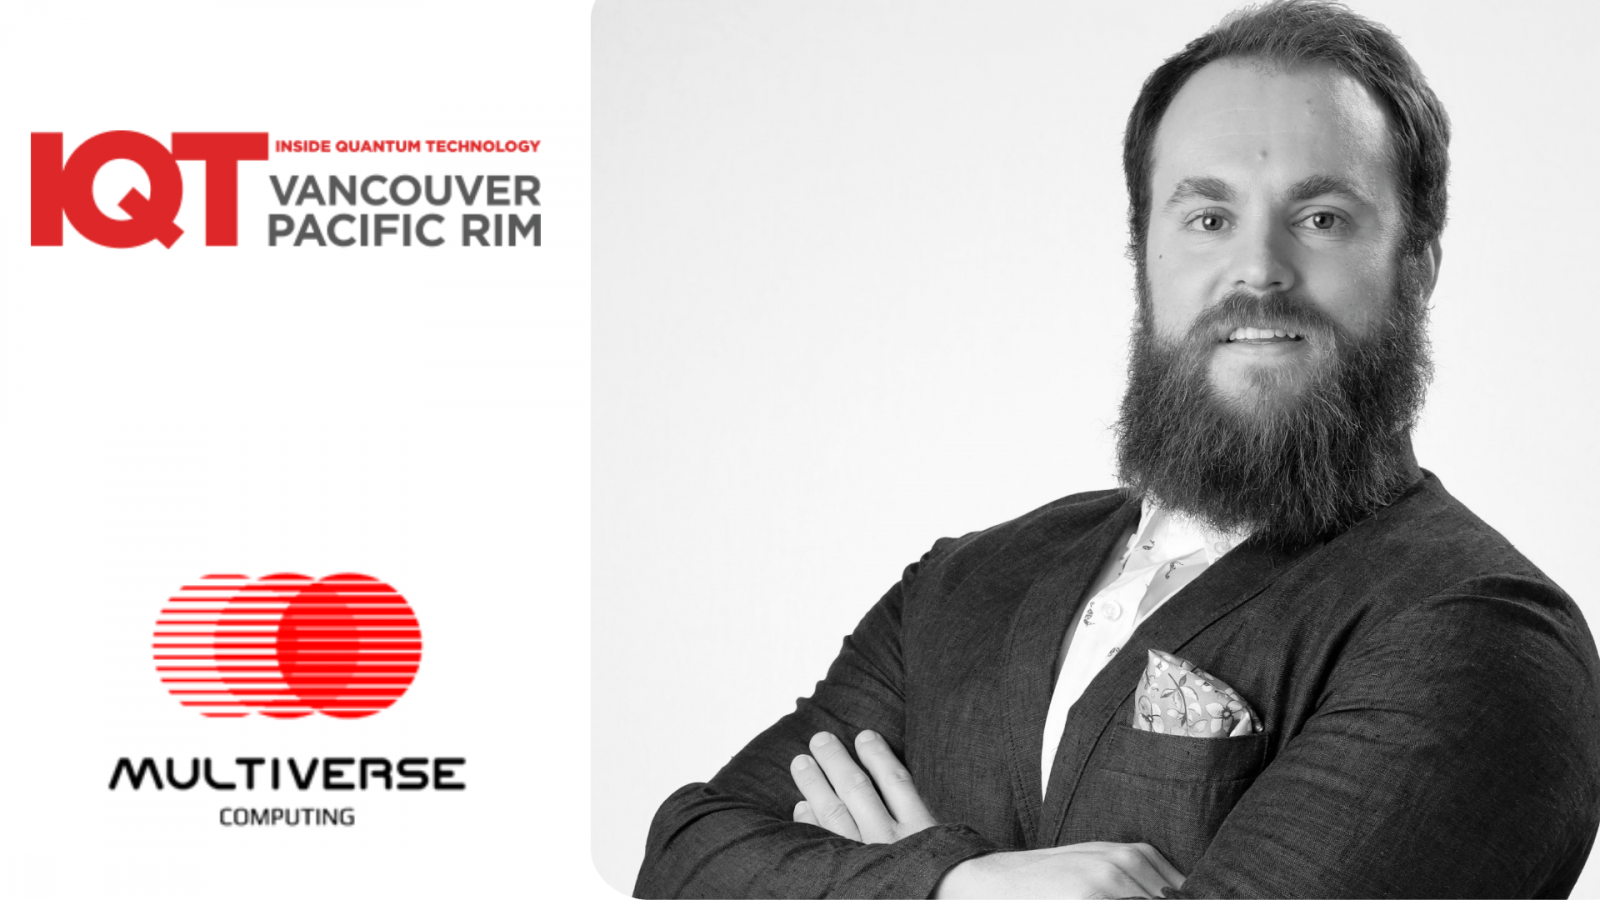 Samuel Palmer, Financial Engineering Director at Multiverse Computing is a 2024 Speaker at the IQT Vancouver/Pacific Rim Conference